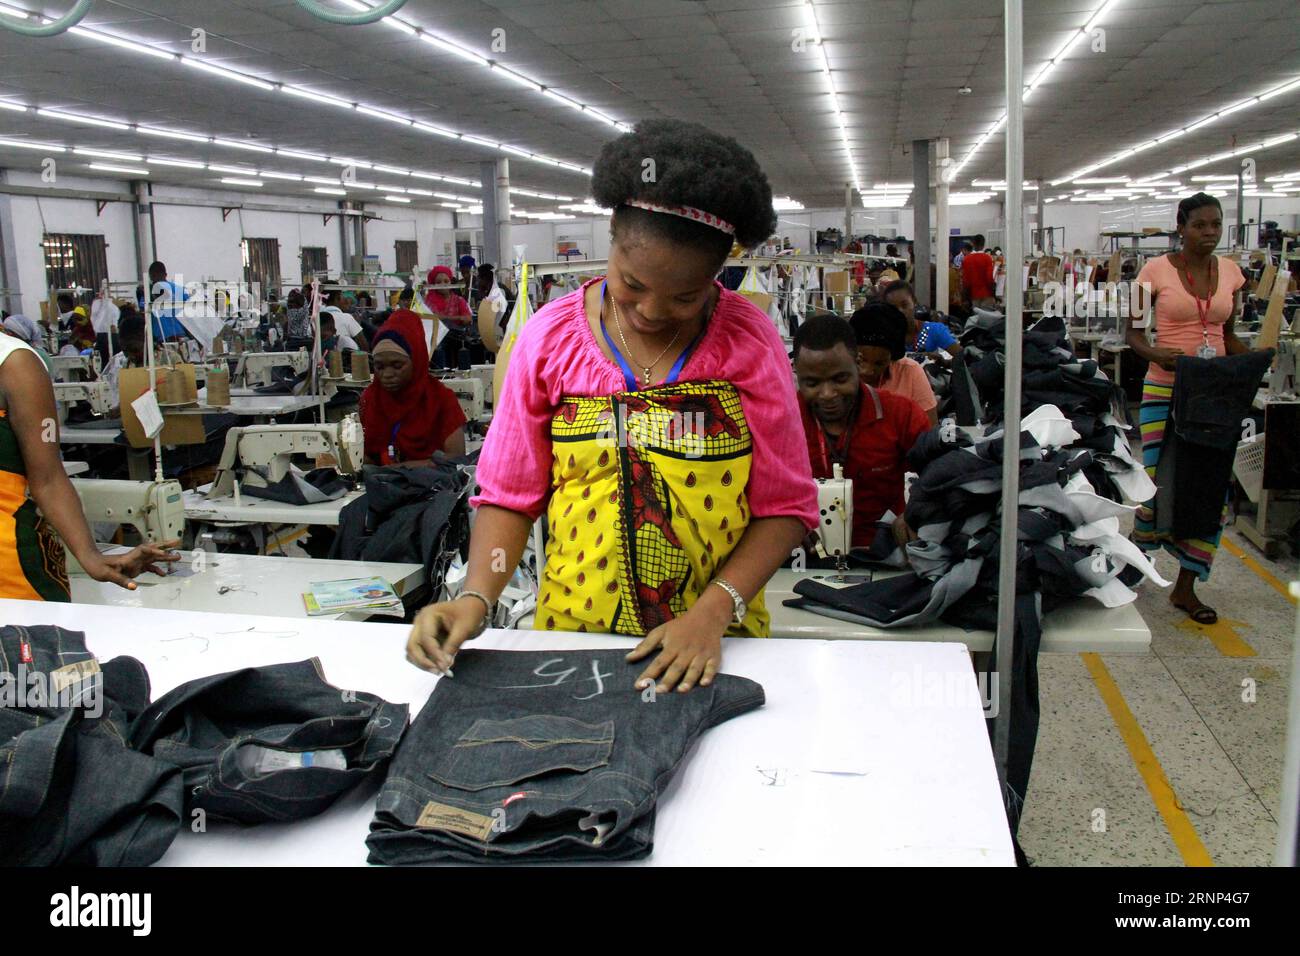 (170810) -- DAR ES SALAAM, Aug. 10, 2017 -- Photo taken on Aug. 7 shows local people working in Chinese-invested Tooku Garments Company Limited in Benjamin Mkapa Export Processing Zone in Dar es Salaam, Tanzania. Some 2,700 Tanzanians are employed by the Chinese garments manufacturing firm which started operations in February 2012 by building a sewing and washing factory with sewage treatment, a generator and other infrastructure. ) TANZANIA-DAR ES SALAAM-CHINESE FIRM LixSibo PUBLICATIONxNOTxINxCHN   dar it Salaam Aug 10 2017 Photo Taken ON Aug 7 Shows Local Celebrities Working in Chinese Inve Stock Photo